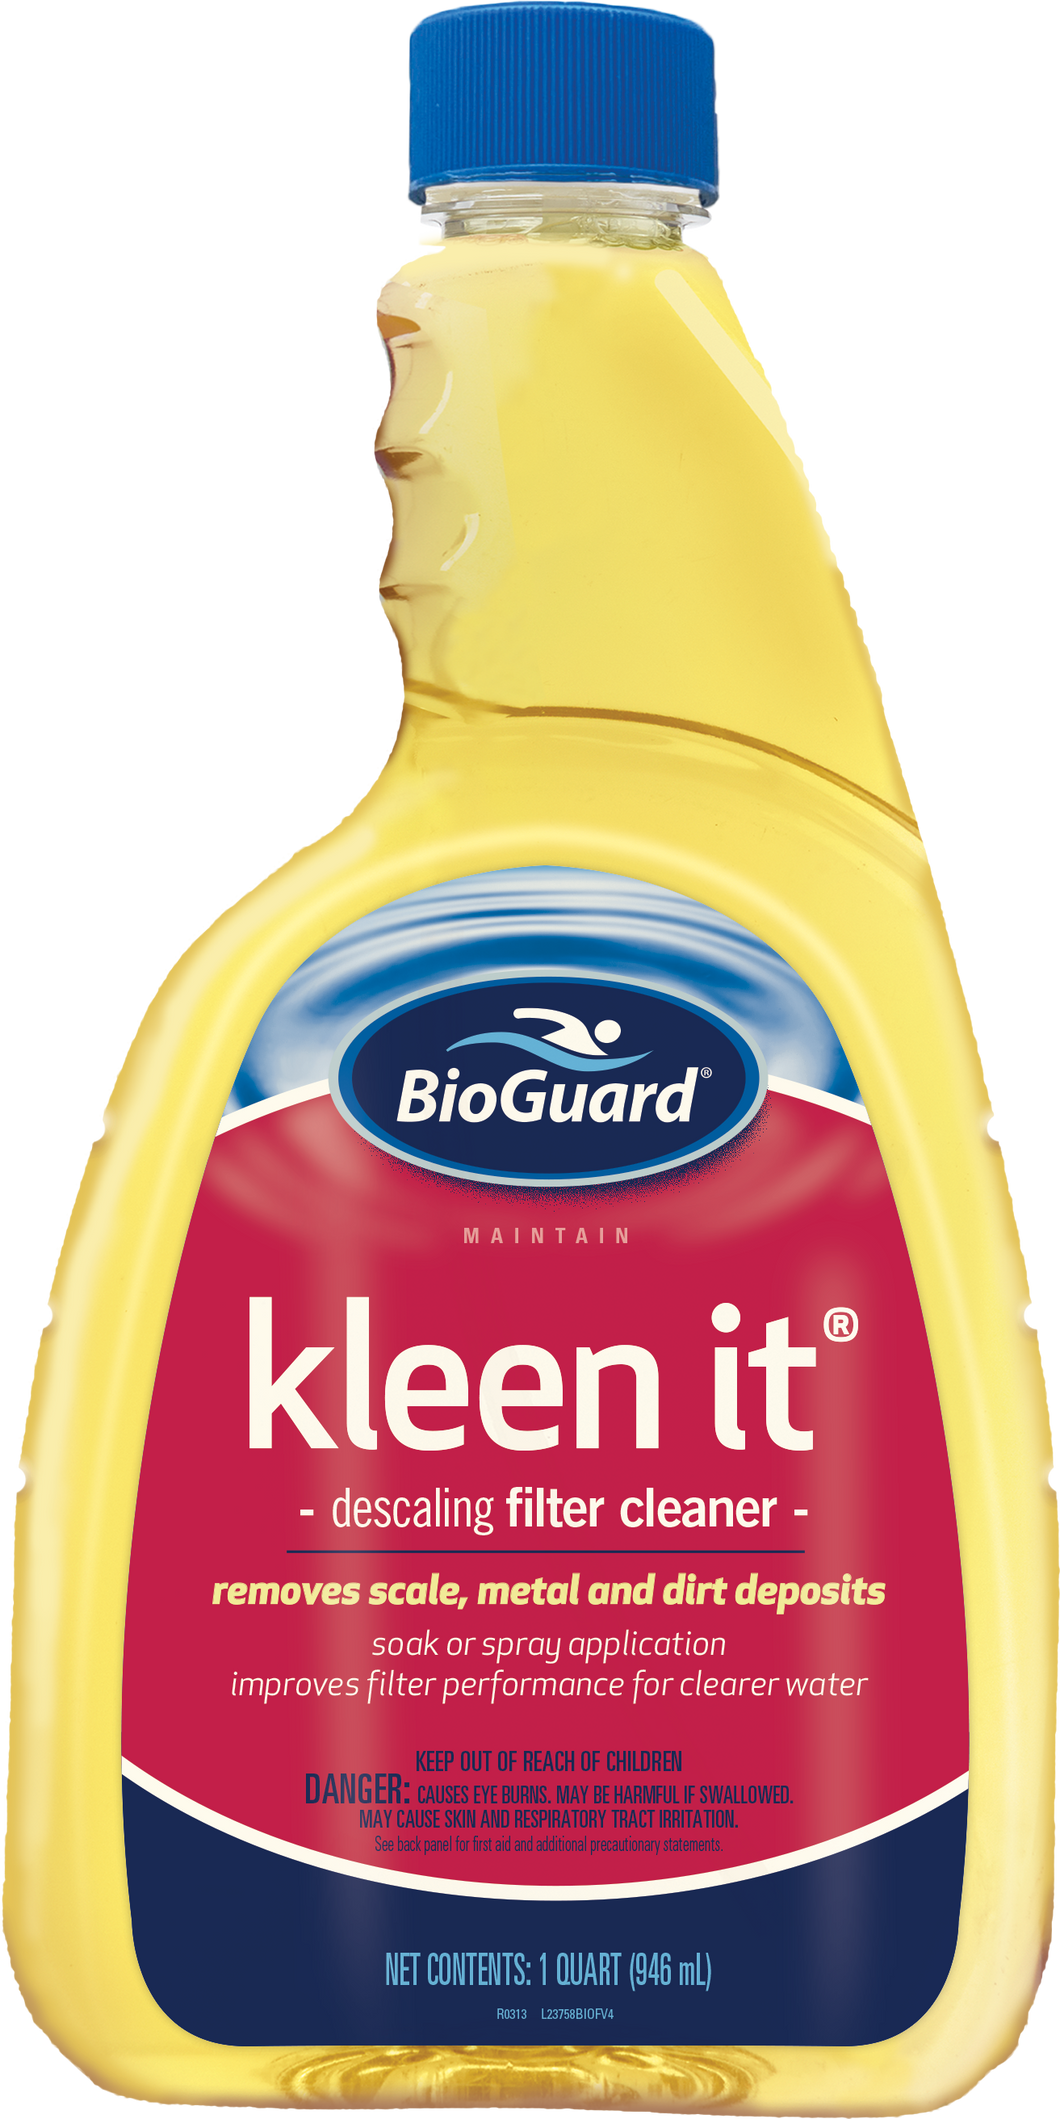 BioGuard Kleen It descaling filter cleaner for swimming pools